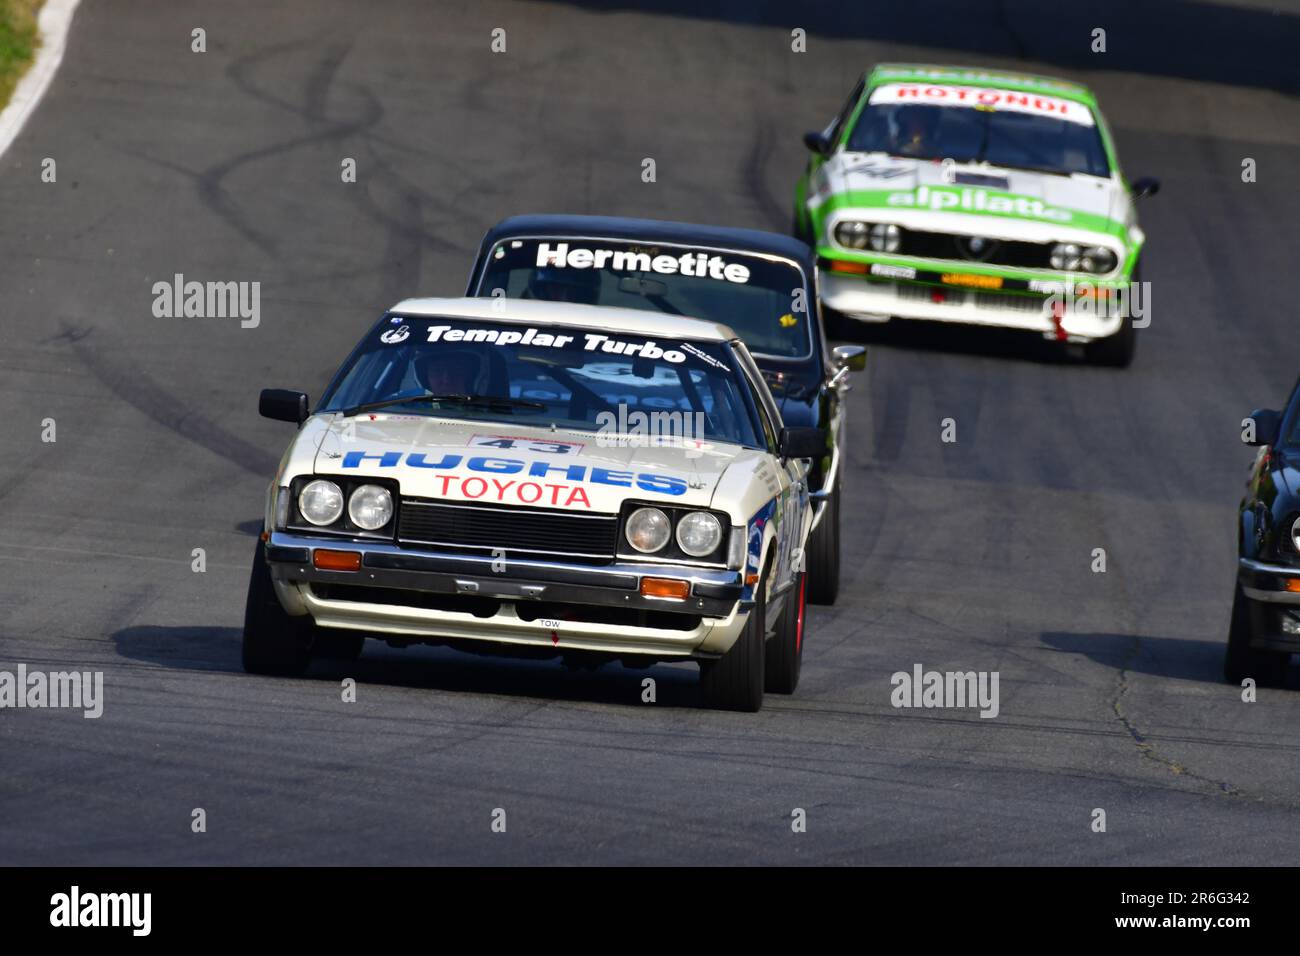 Mark Bevington, Paul Mullen, Toyota Celica, HRDC ‘Gerry Marshall’ Trophy Series, over 30 cars on the grid for a forty five minute two driver race feat Stock Photo